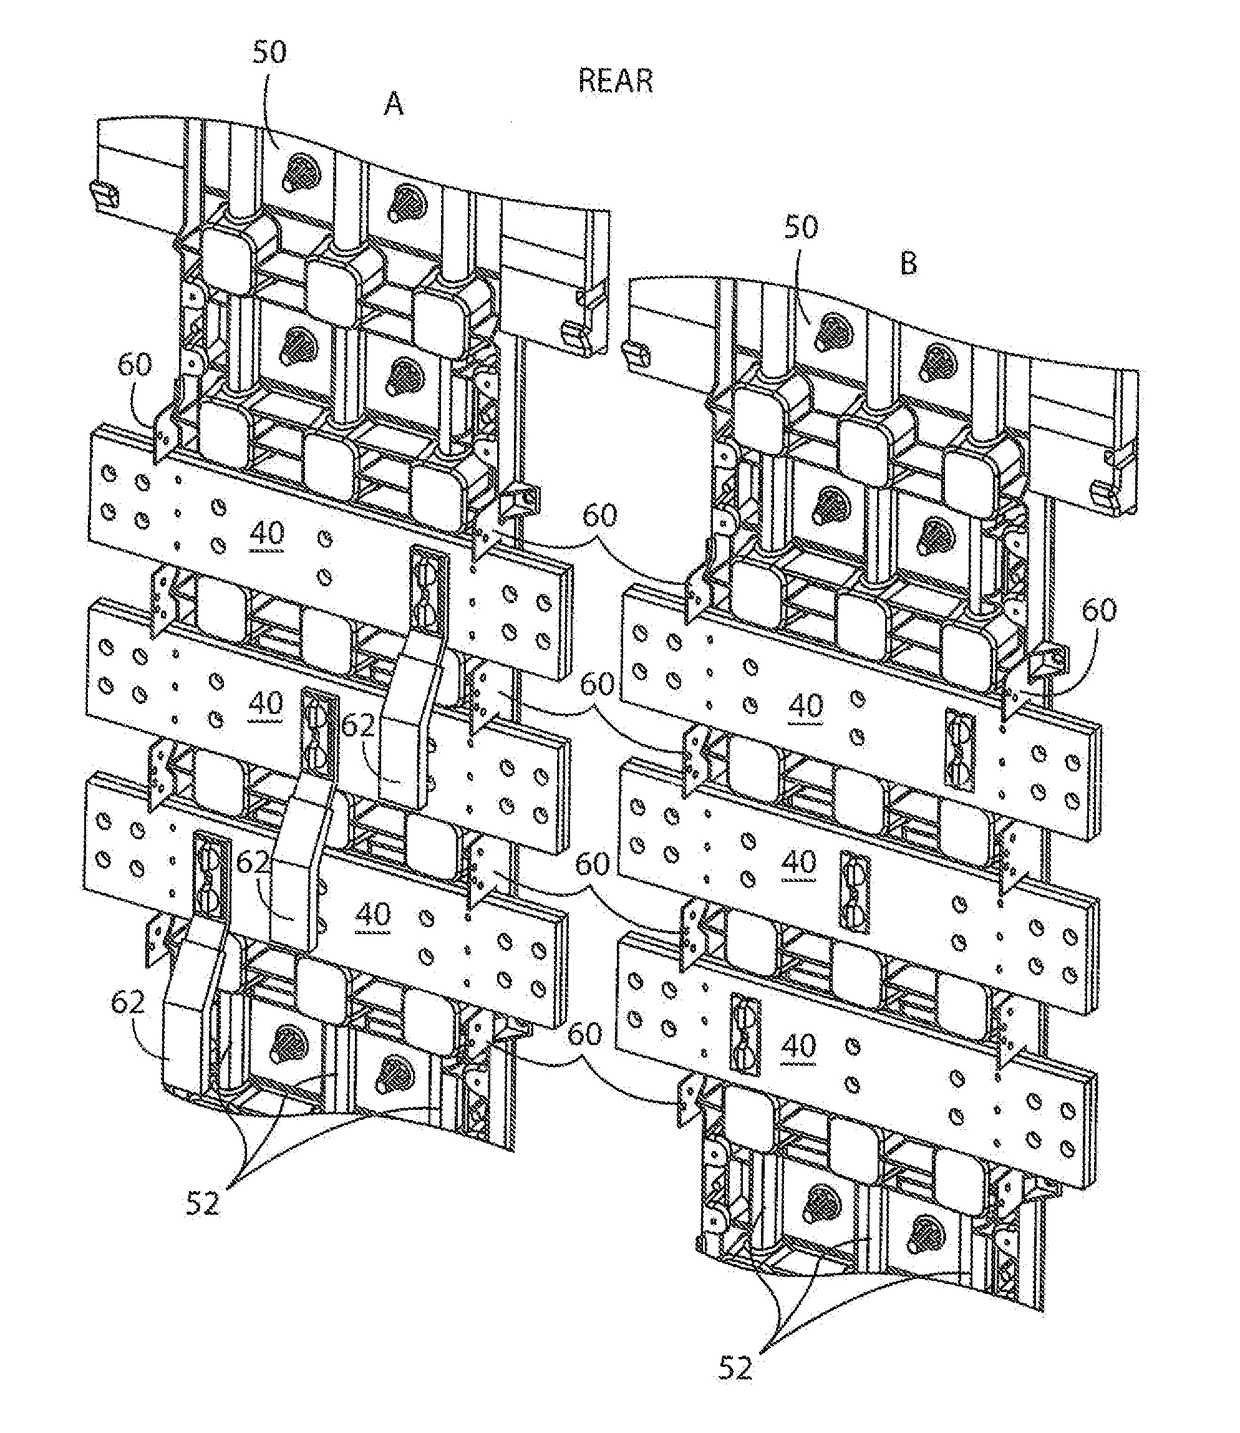 System for Isolating Power Conductors Using Molded Assemblies